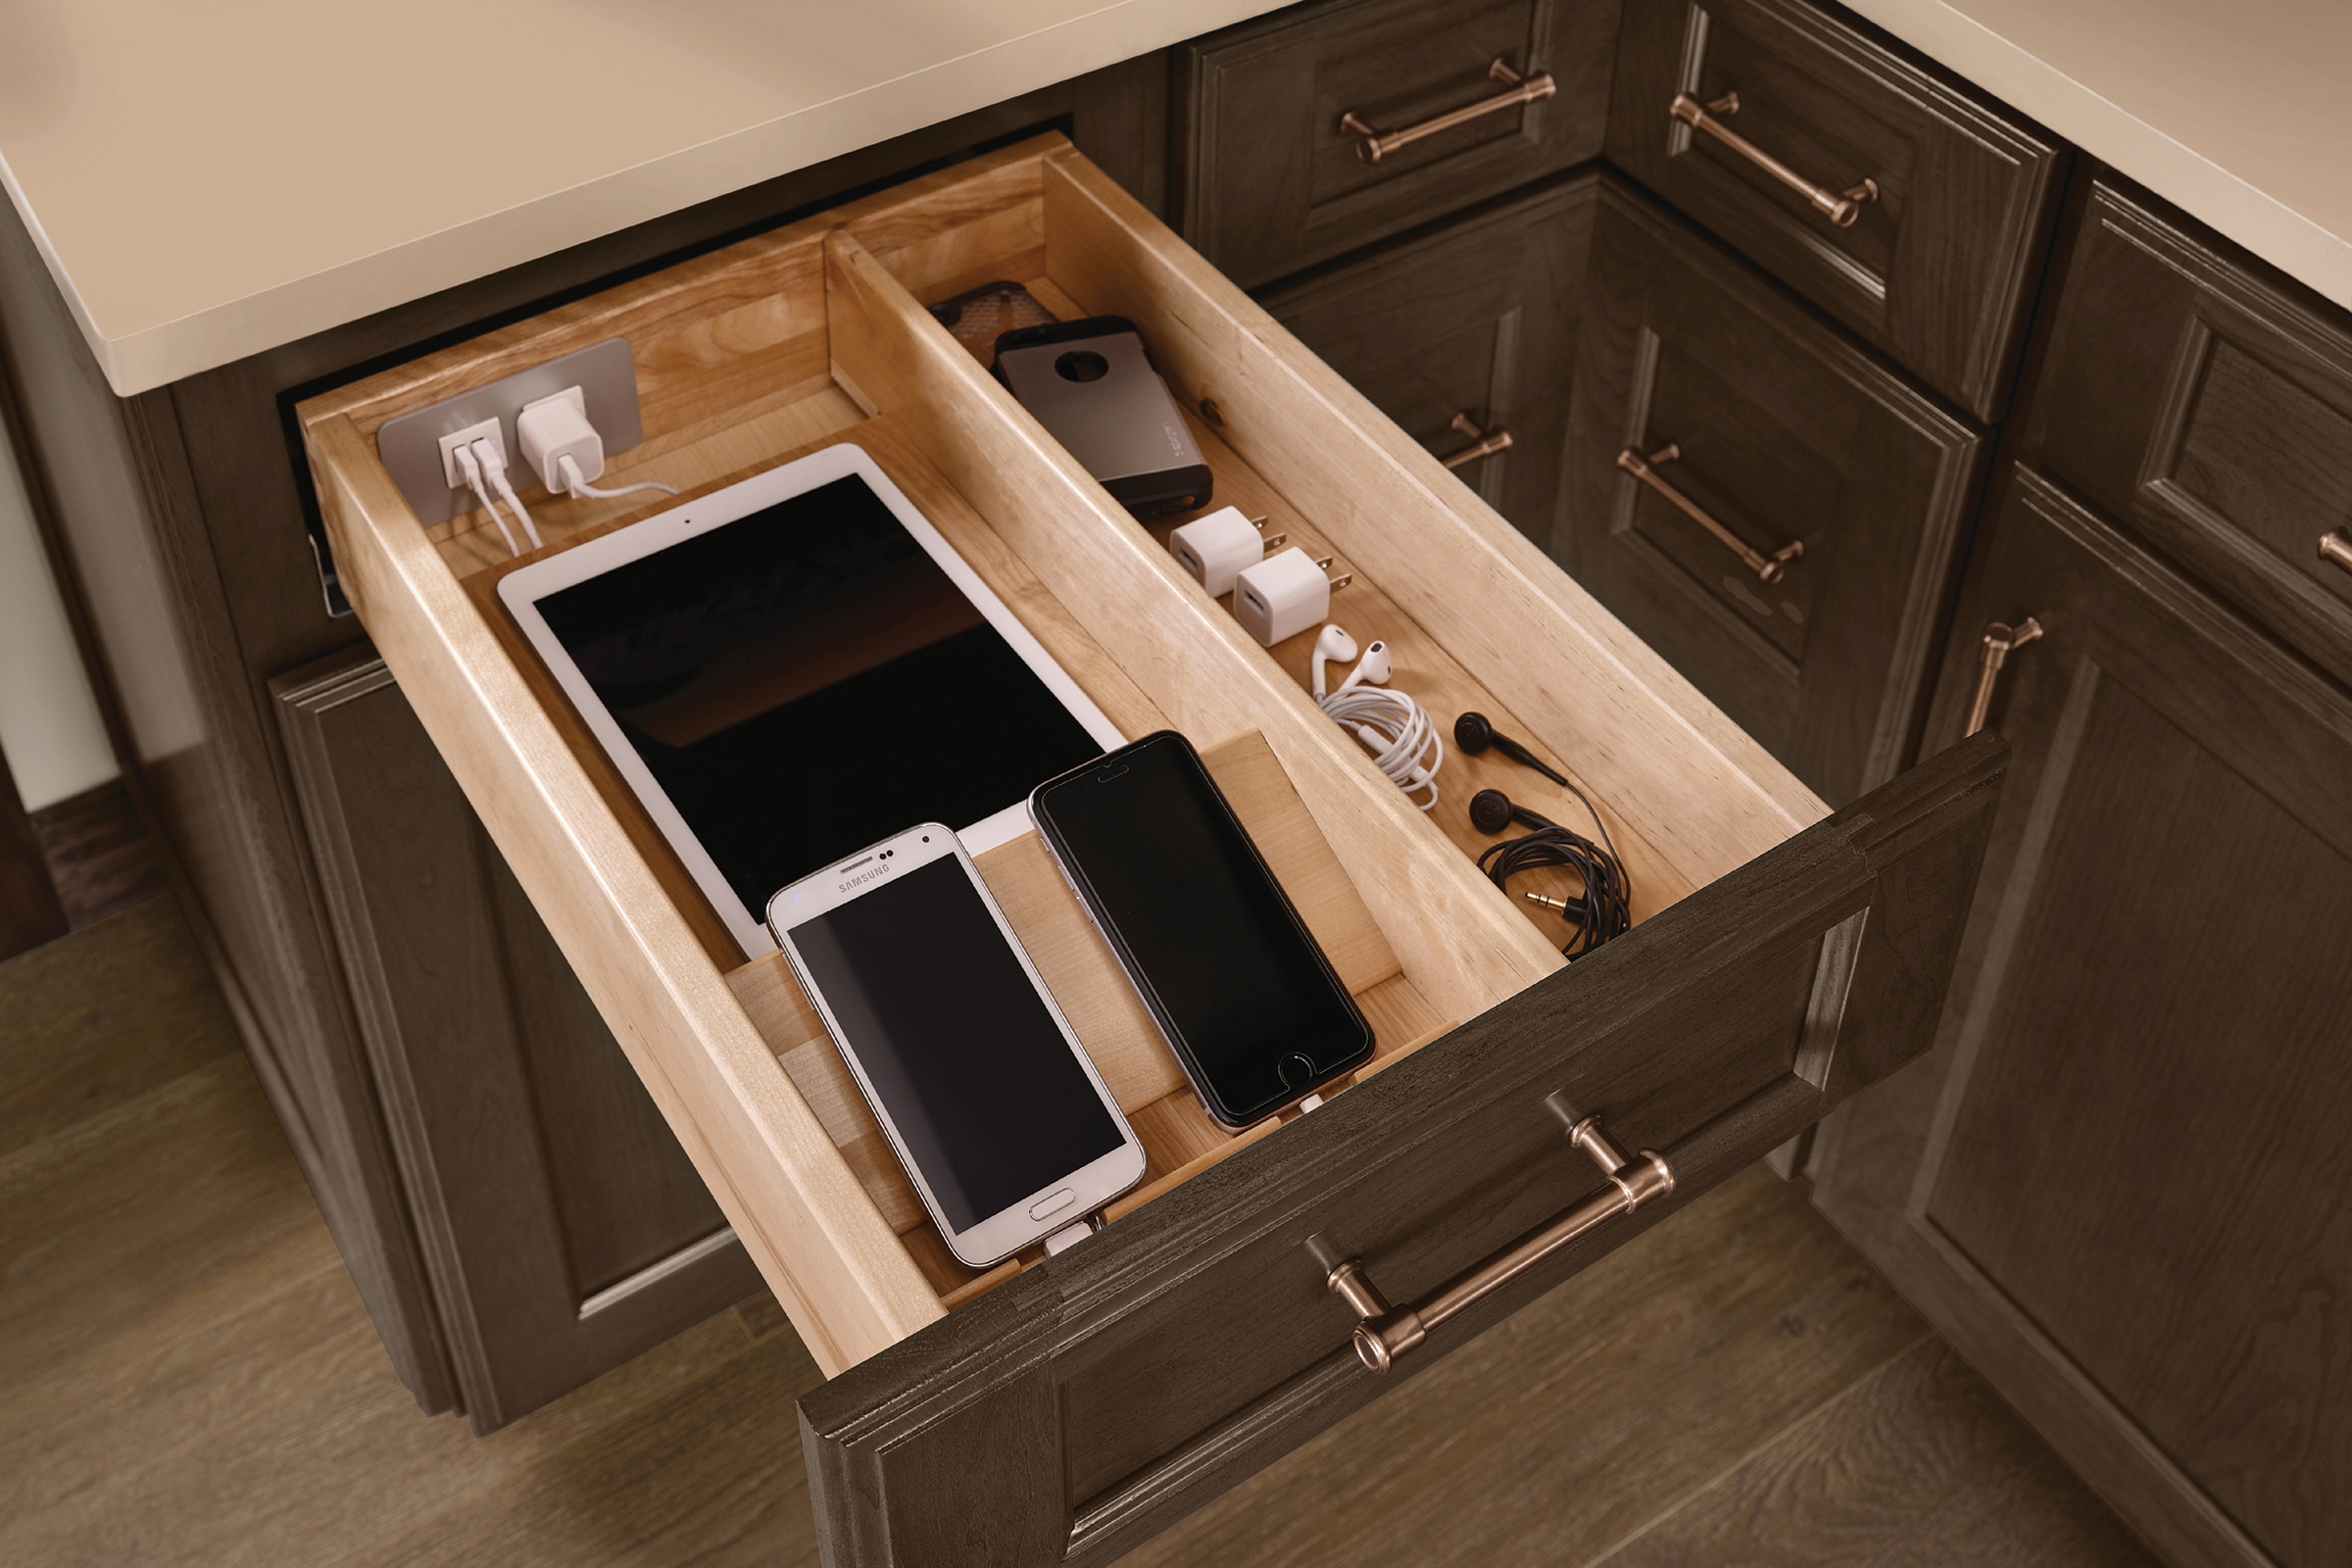 Charging station for phones and other smart devices hidden in the top drawer of a KraftMaid kitchen cabinet